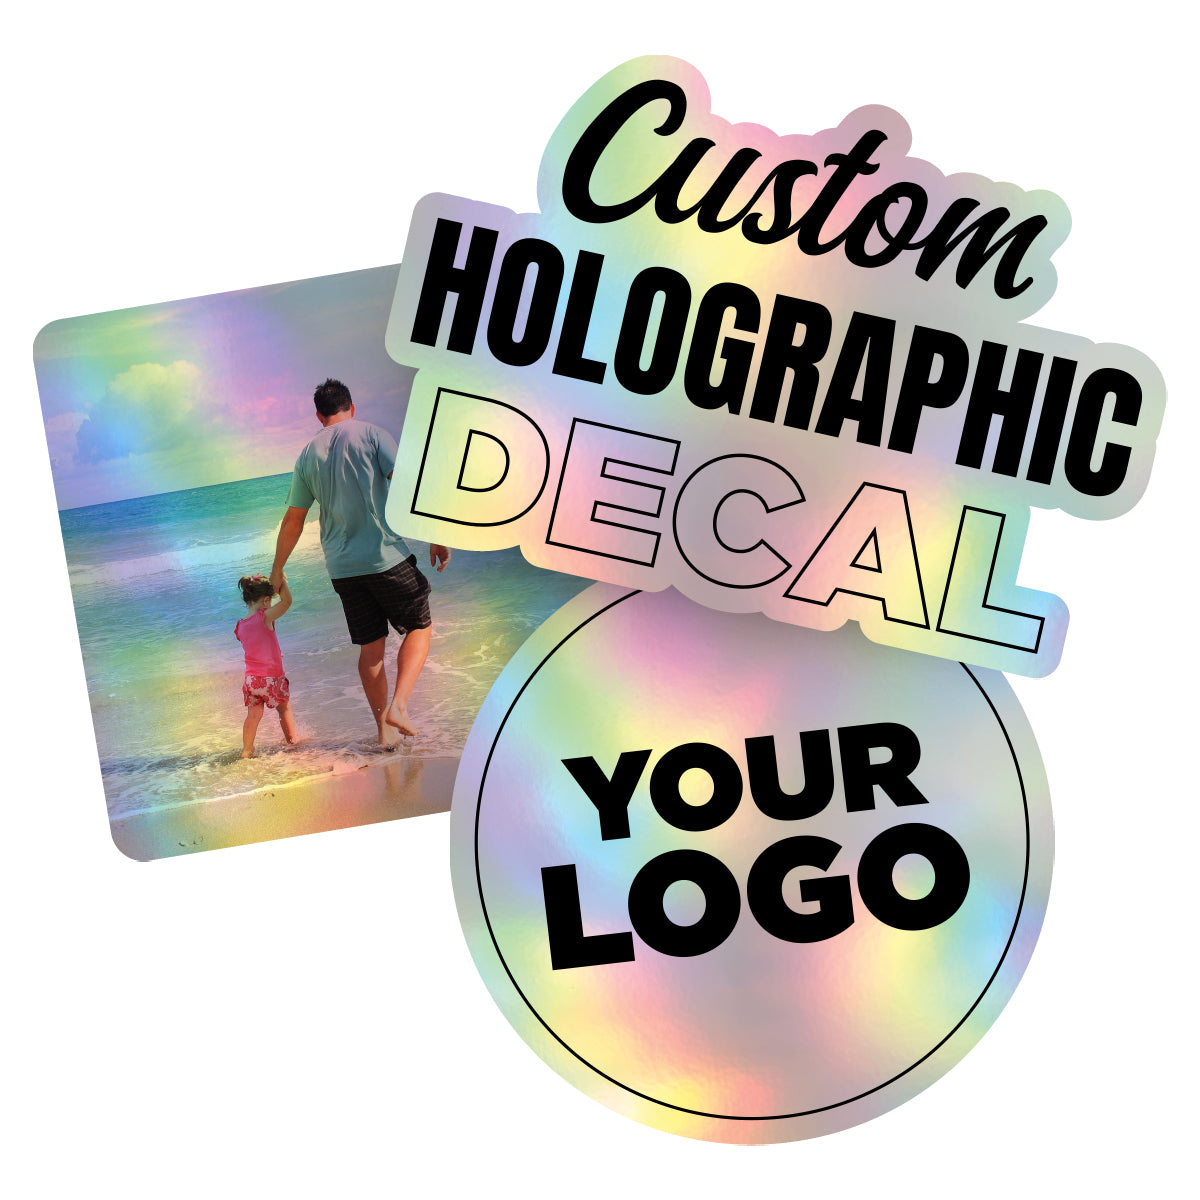 Personalized Holographic Vinyl Sticker Decal Custom Made Any Logo, Image, Text, Or Name Die Cut To Shape - 50 Pack, 10 Inch, Die Cut